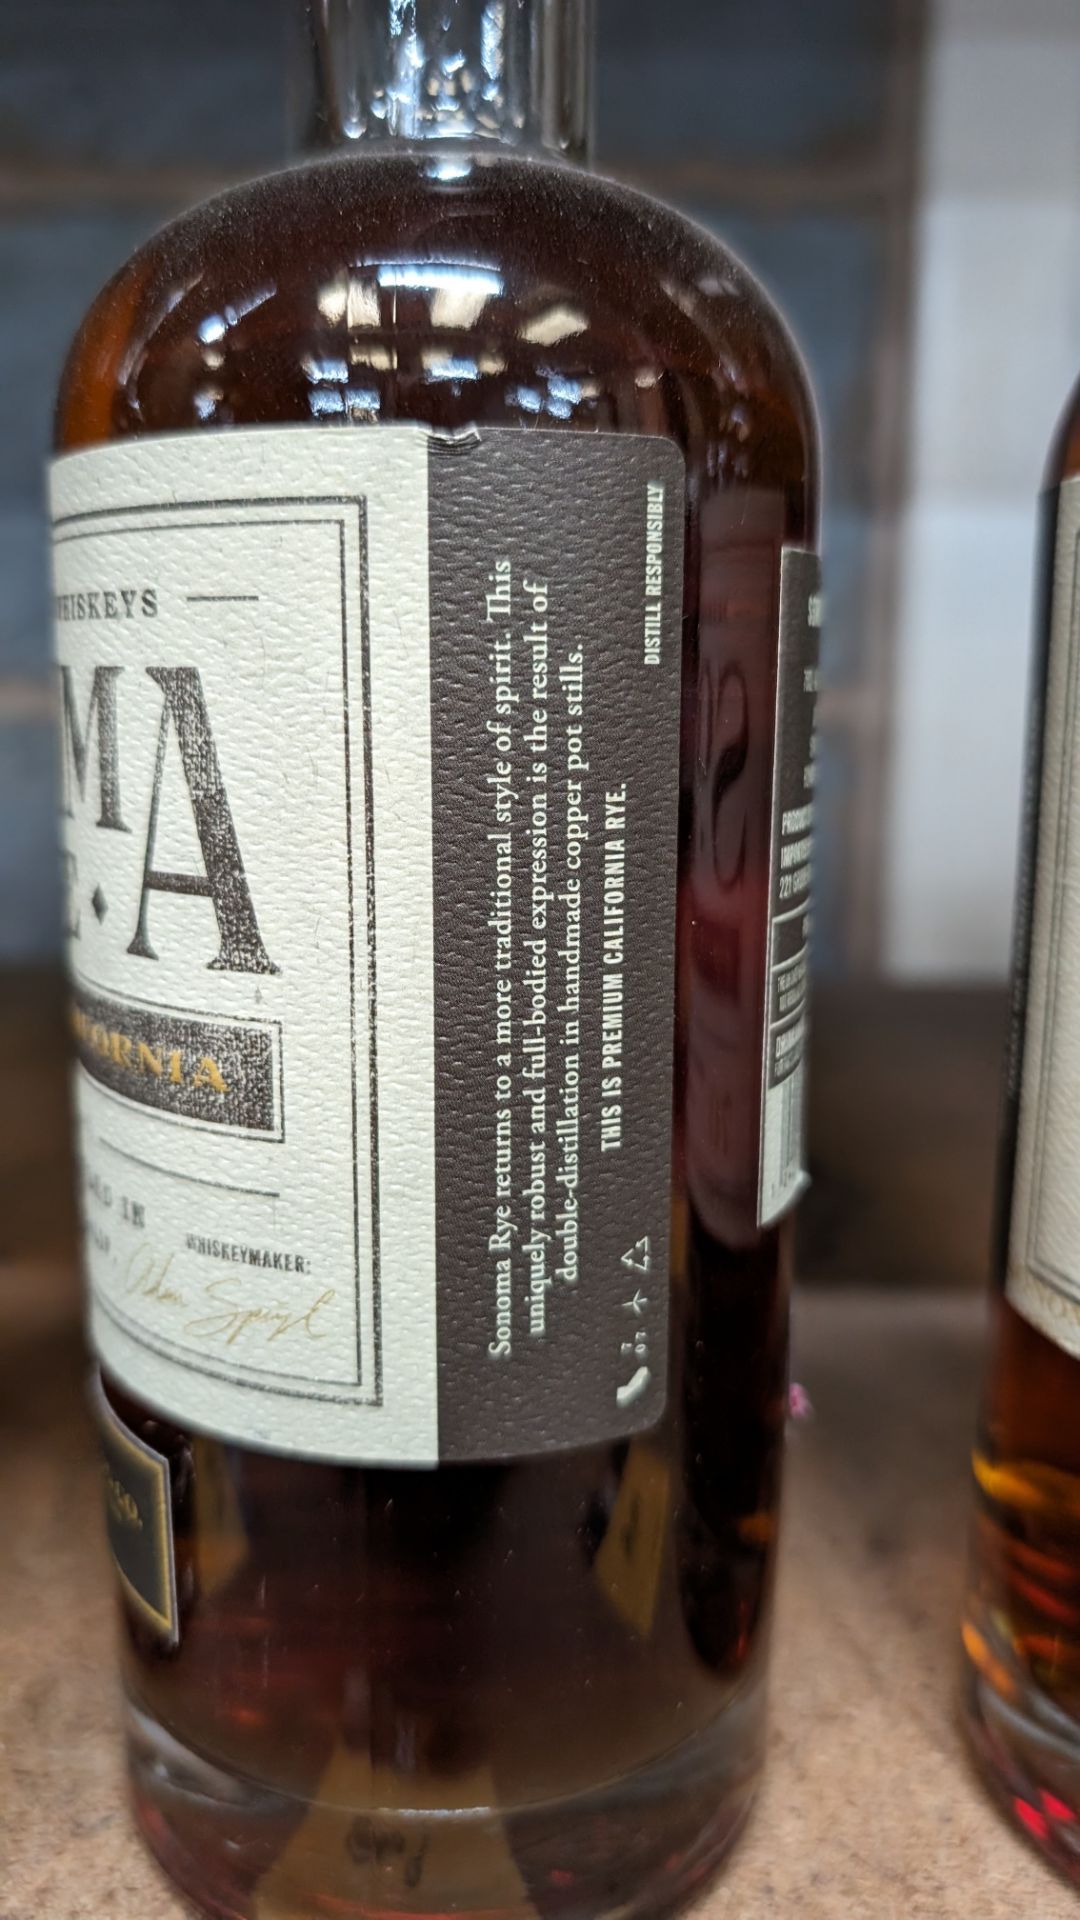 1 off 700ml bottle of Sonoma Rye Whiskey. 46.5% alc/vol (93 proof). Distilled and bottled in Sonom - Image 3 of 5